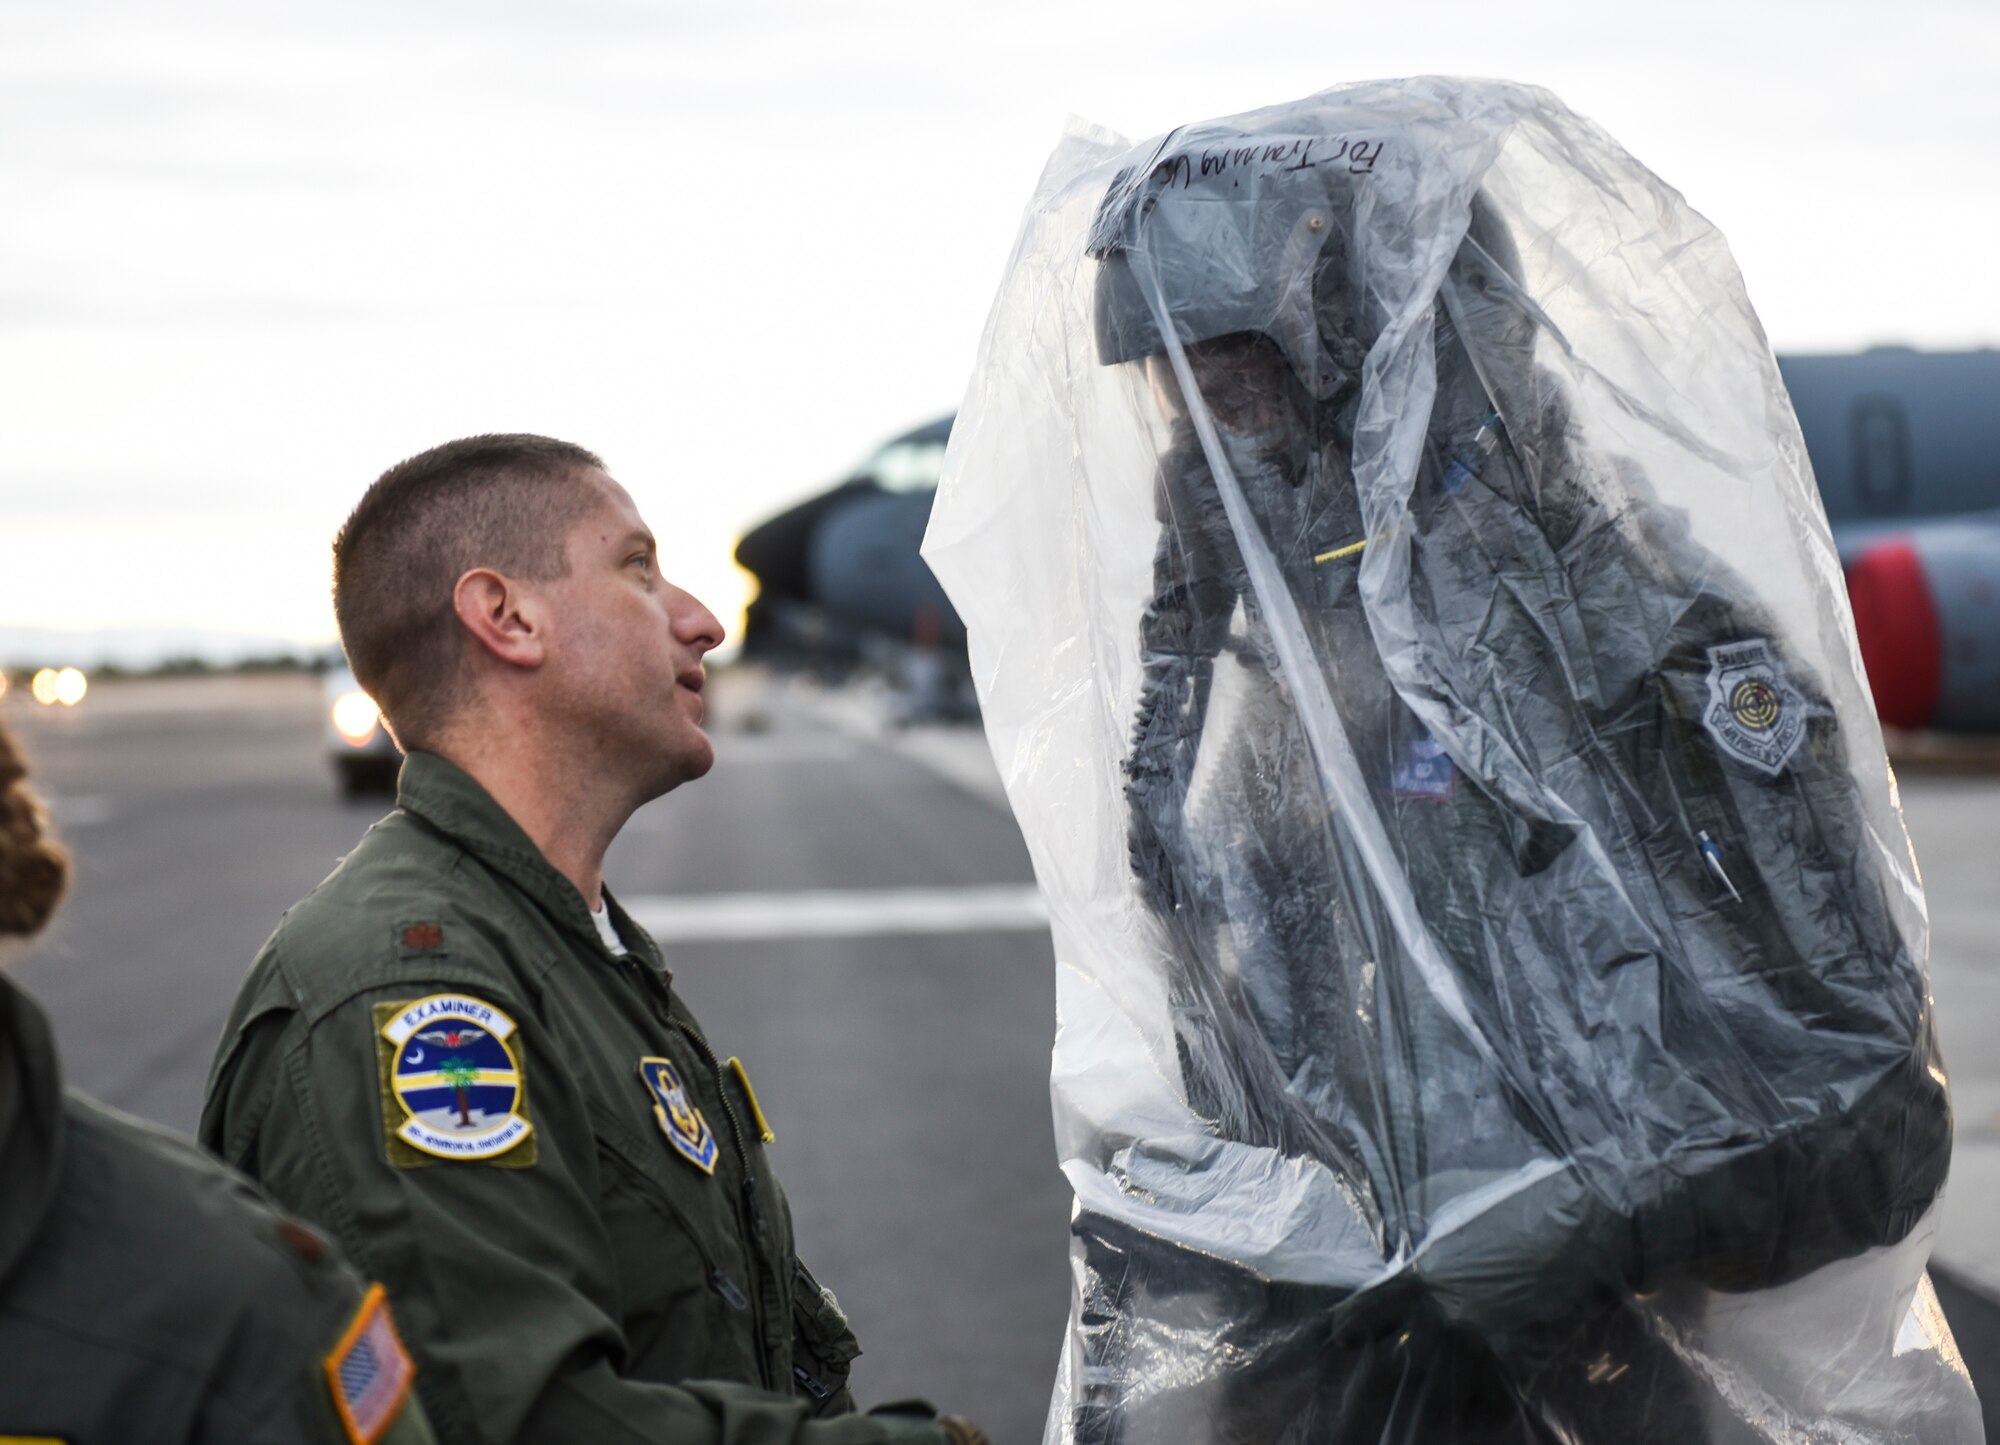 U.S. Air Force Lt. Col Kevin Parsons, right, 93rd Air Refueling Squadron commander assigned to Fairchild Air Force Base, Washington, discusses aeromedical evacuation mission details with Maj. Jeffrey Fox, 315th Aeromedical Evacuation Squadron flight nurse from Join Base Charleston, South Carolina, while wearing an Aircrew Eye and Respiratory Protection System (AERPS) Sept. 16, 2019, at Fairchild AFB during Exercise Mobility Guardian 2019.